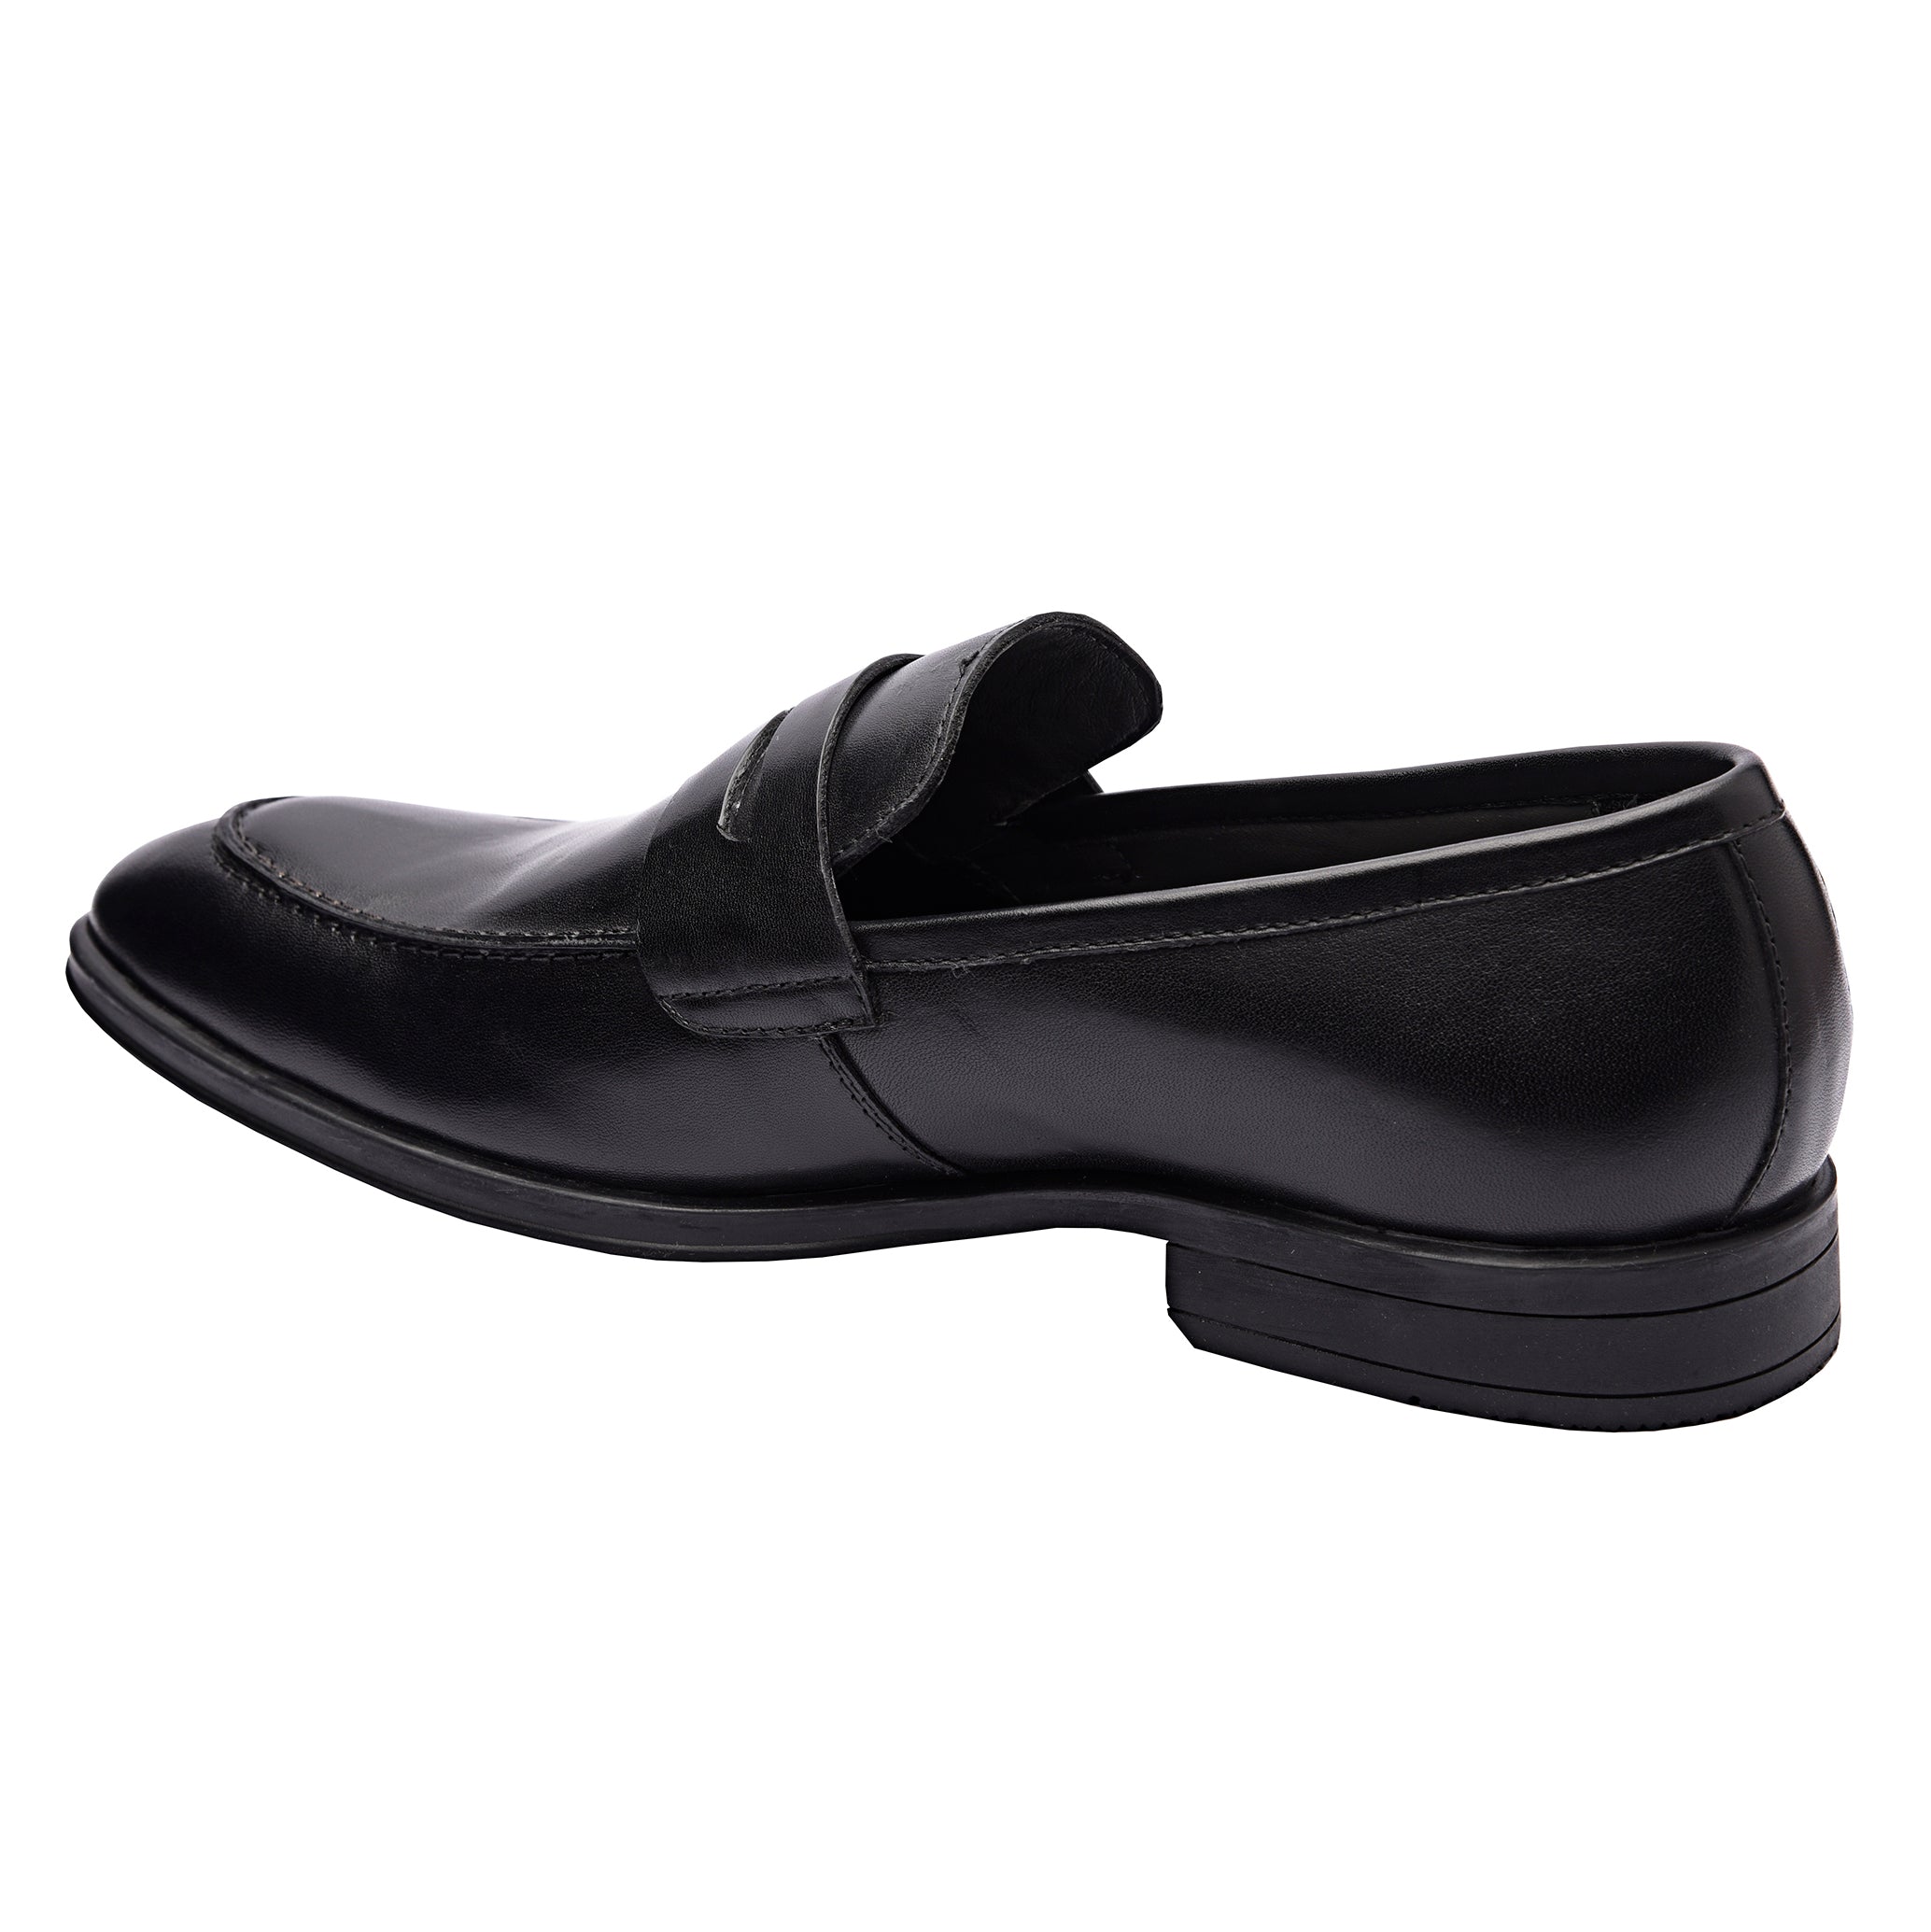 Samuel Classic Penny Loafers